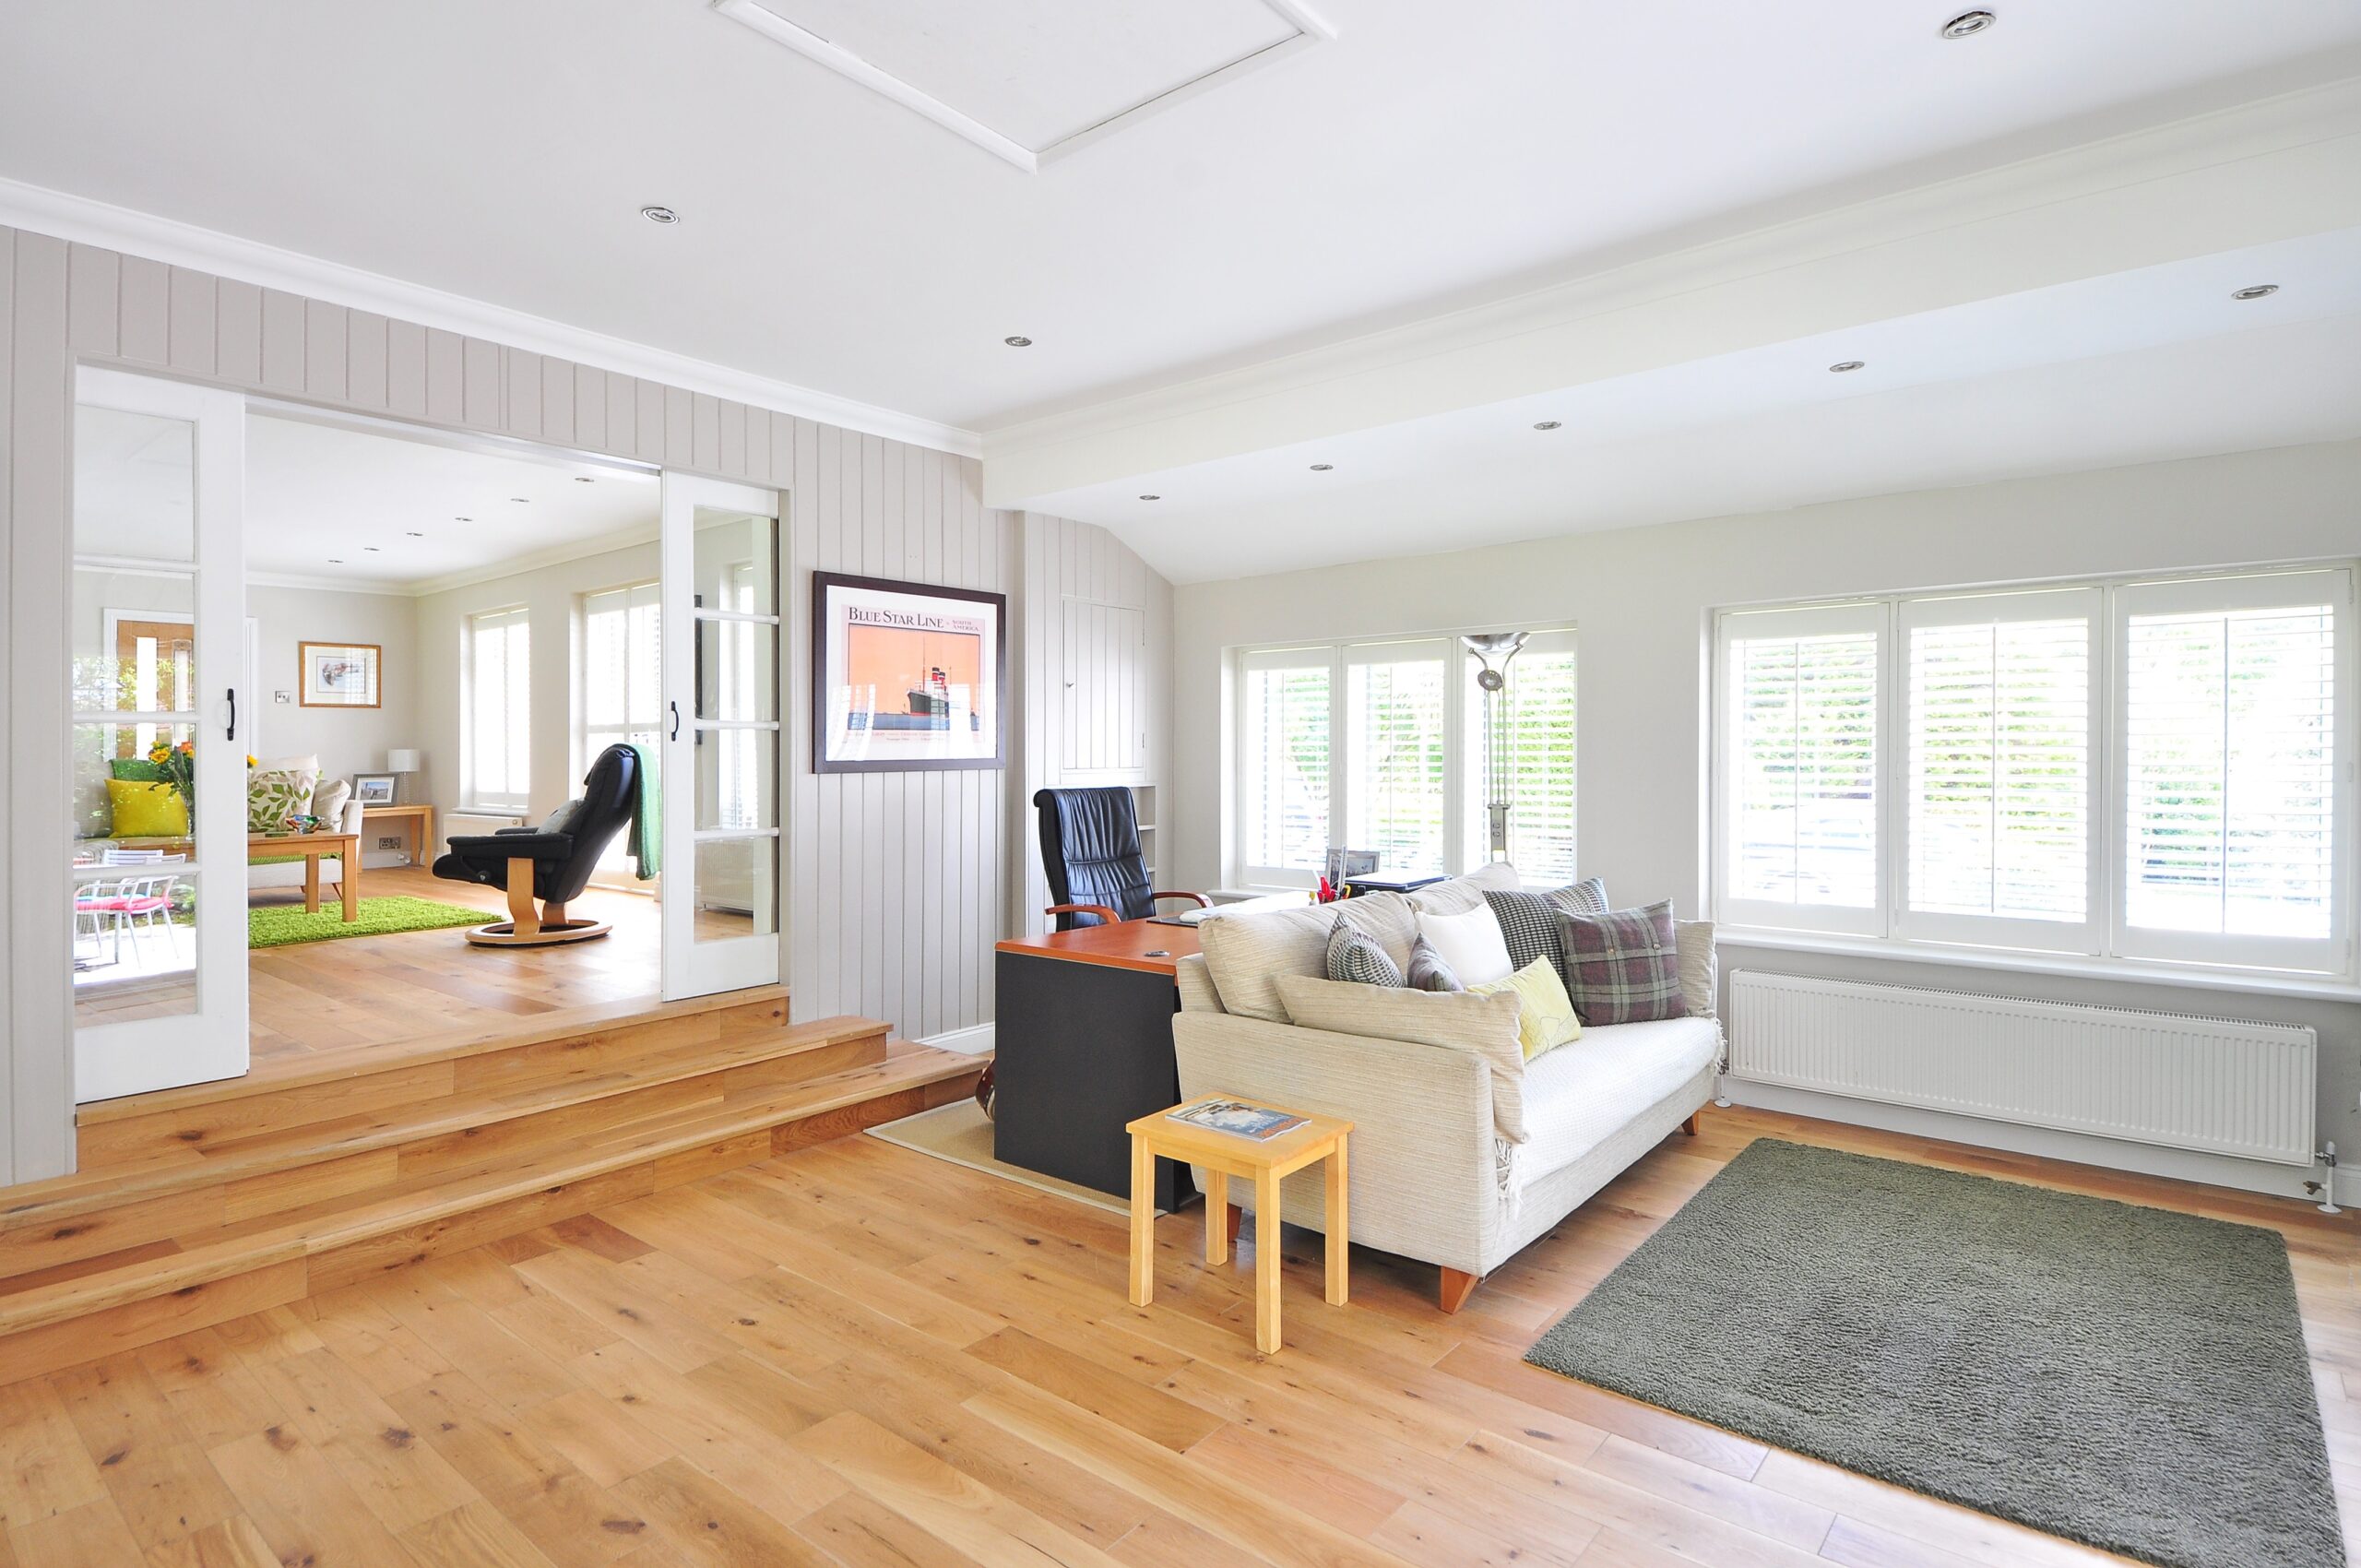 A Guide To Finding The Perfect Finish For Engineered Wood Floors